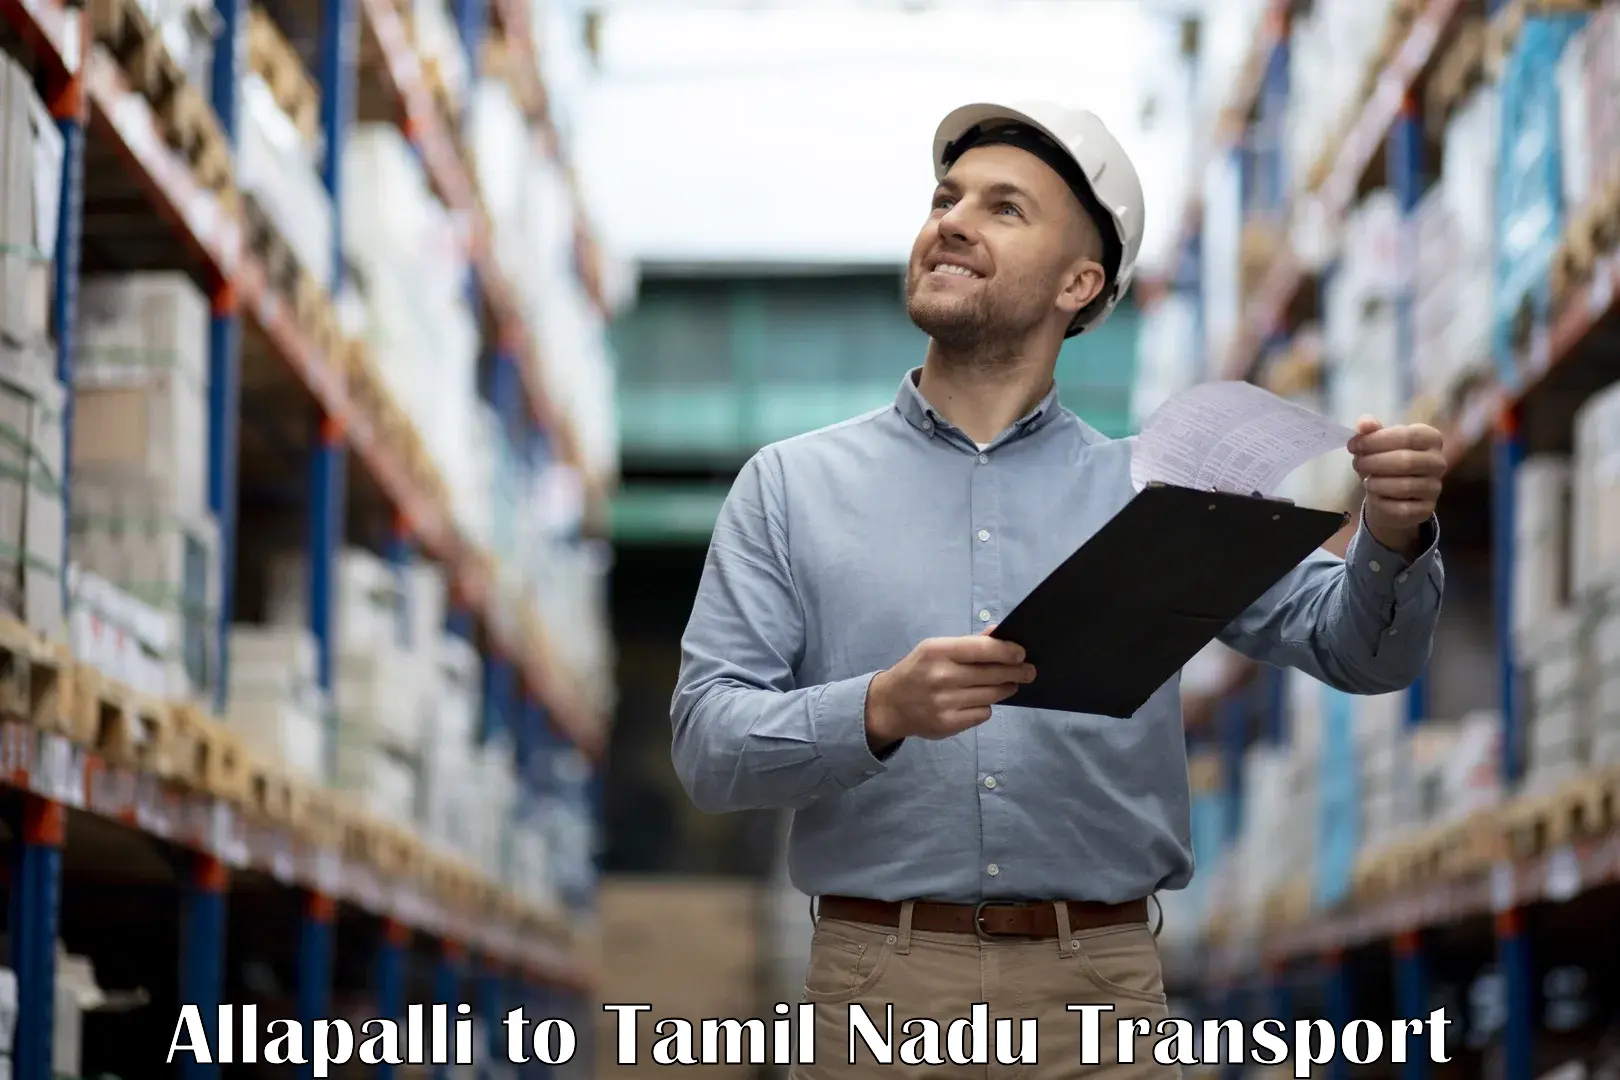 Truck transport companies in India Allapalli to Chennai Port